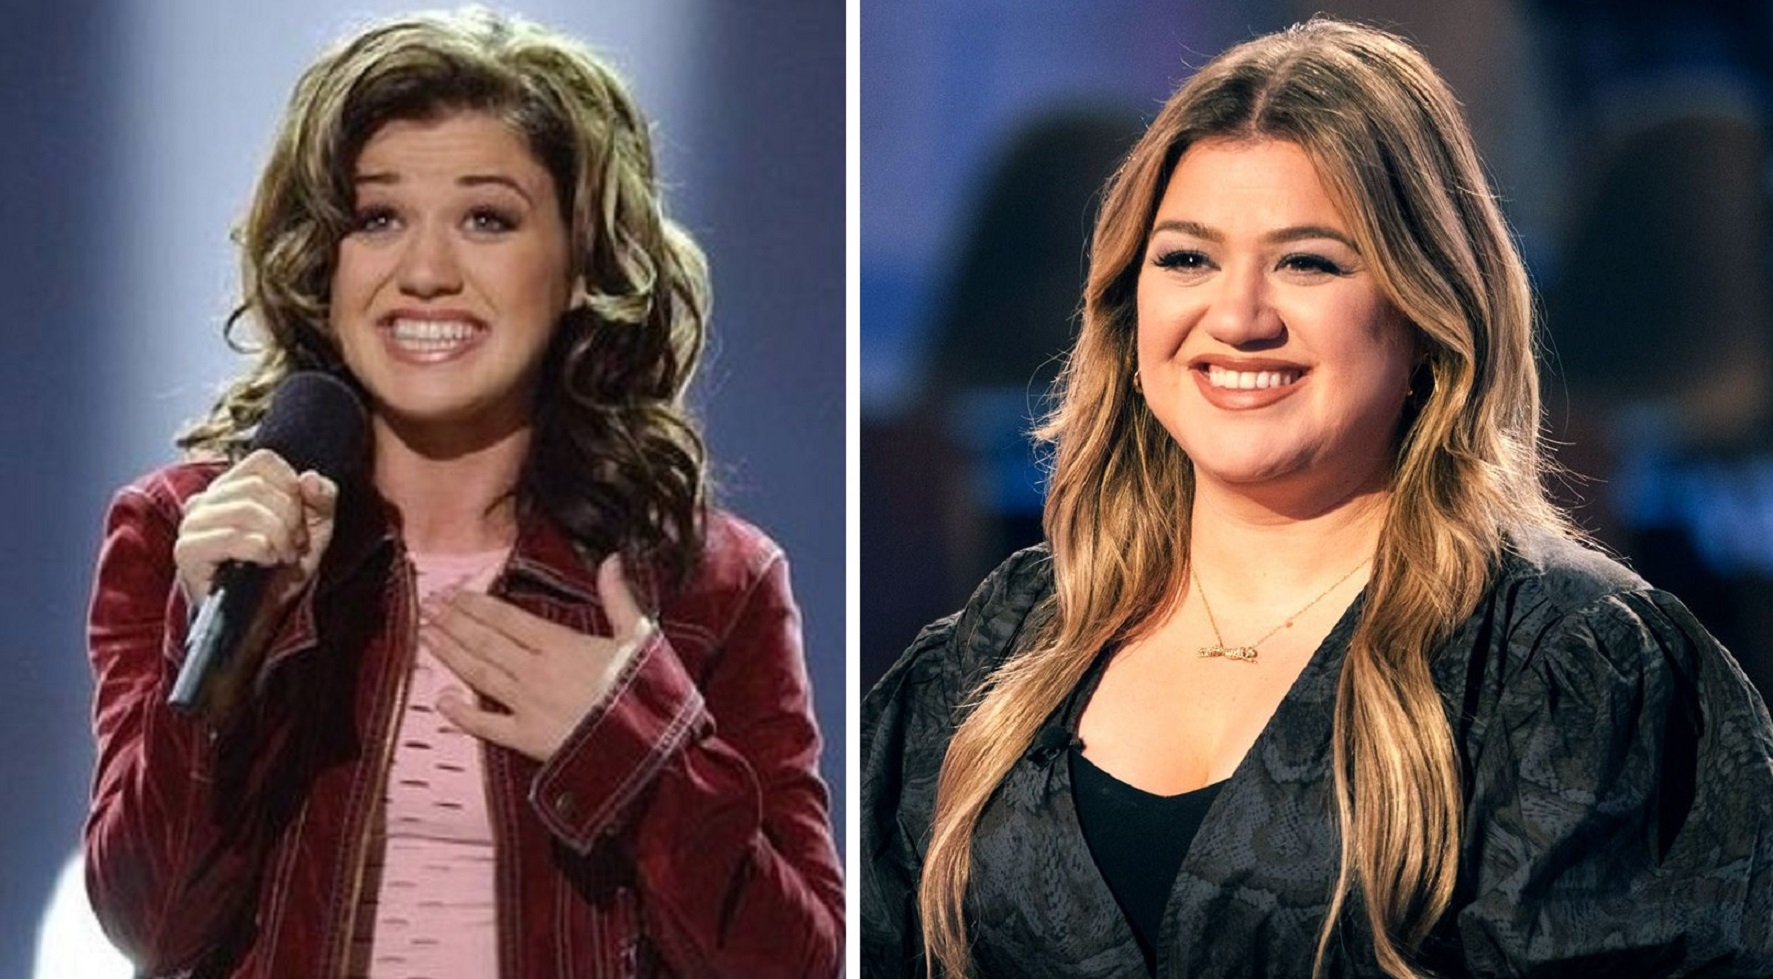 Kelly Clarkson Celebrates 20 Years Since Her ‘American Idol’ Win With An Emotional Post, “Thank You”